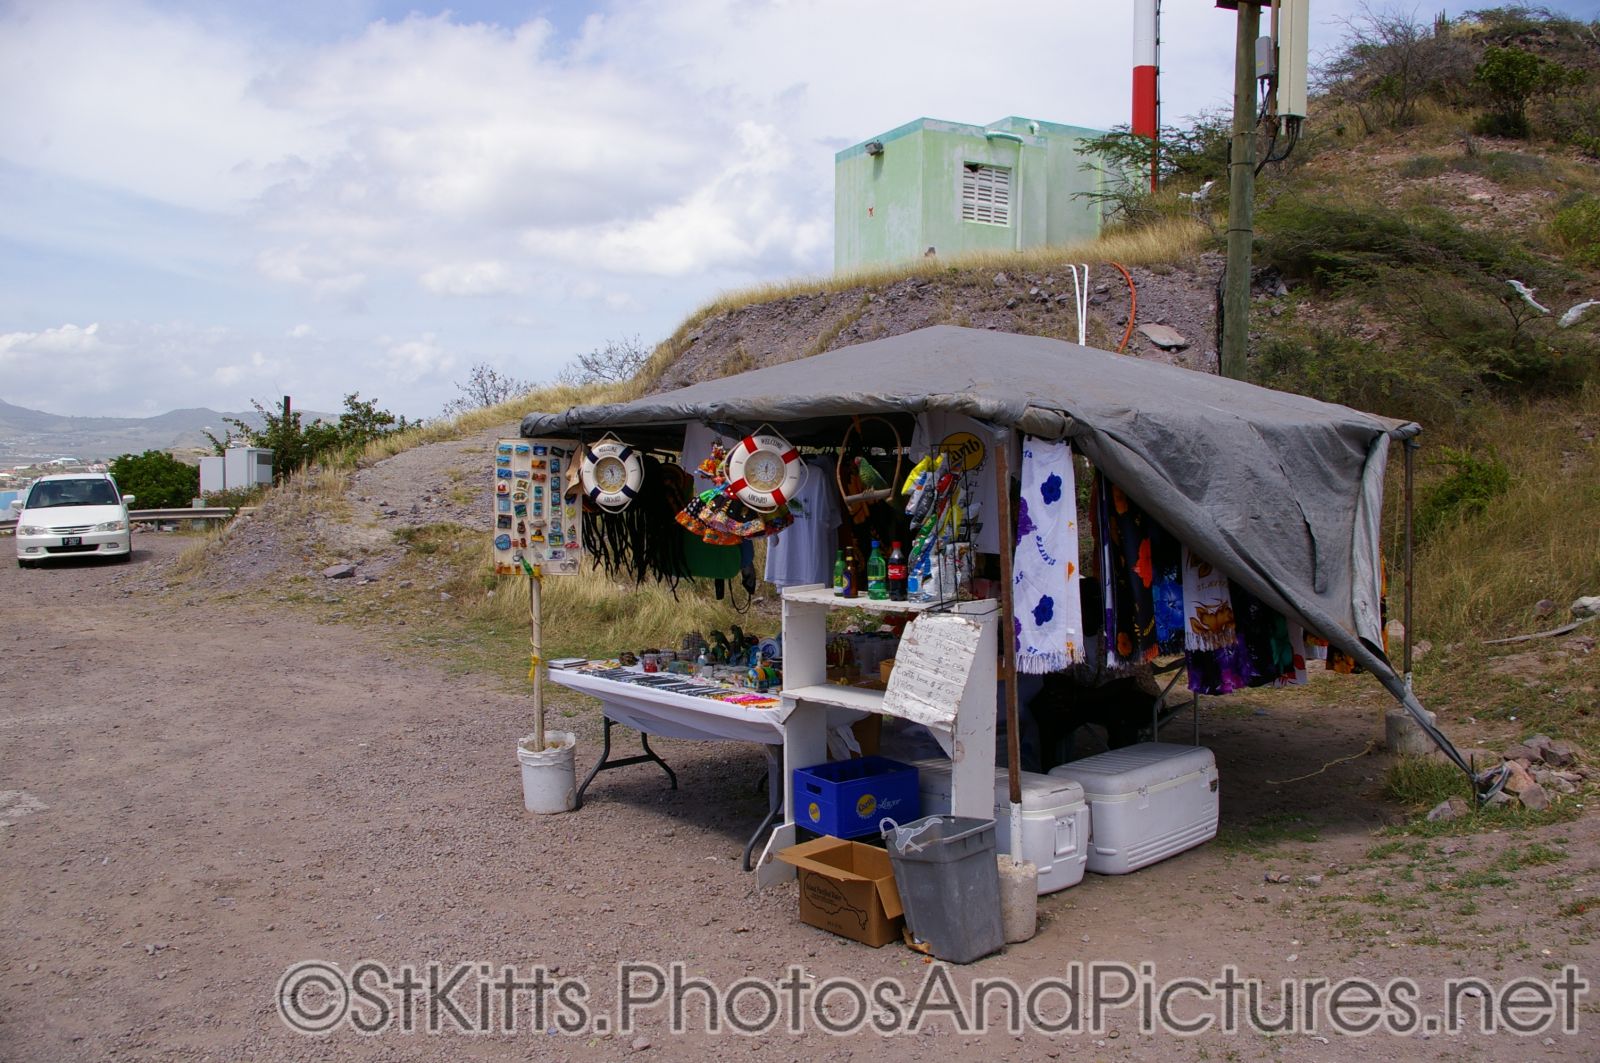 Souvenirs for sale at hill top in St Kitts.jpg
